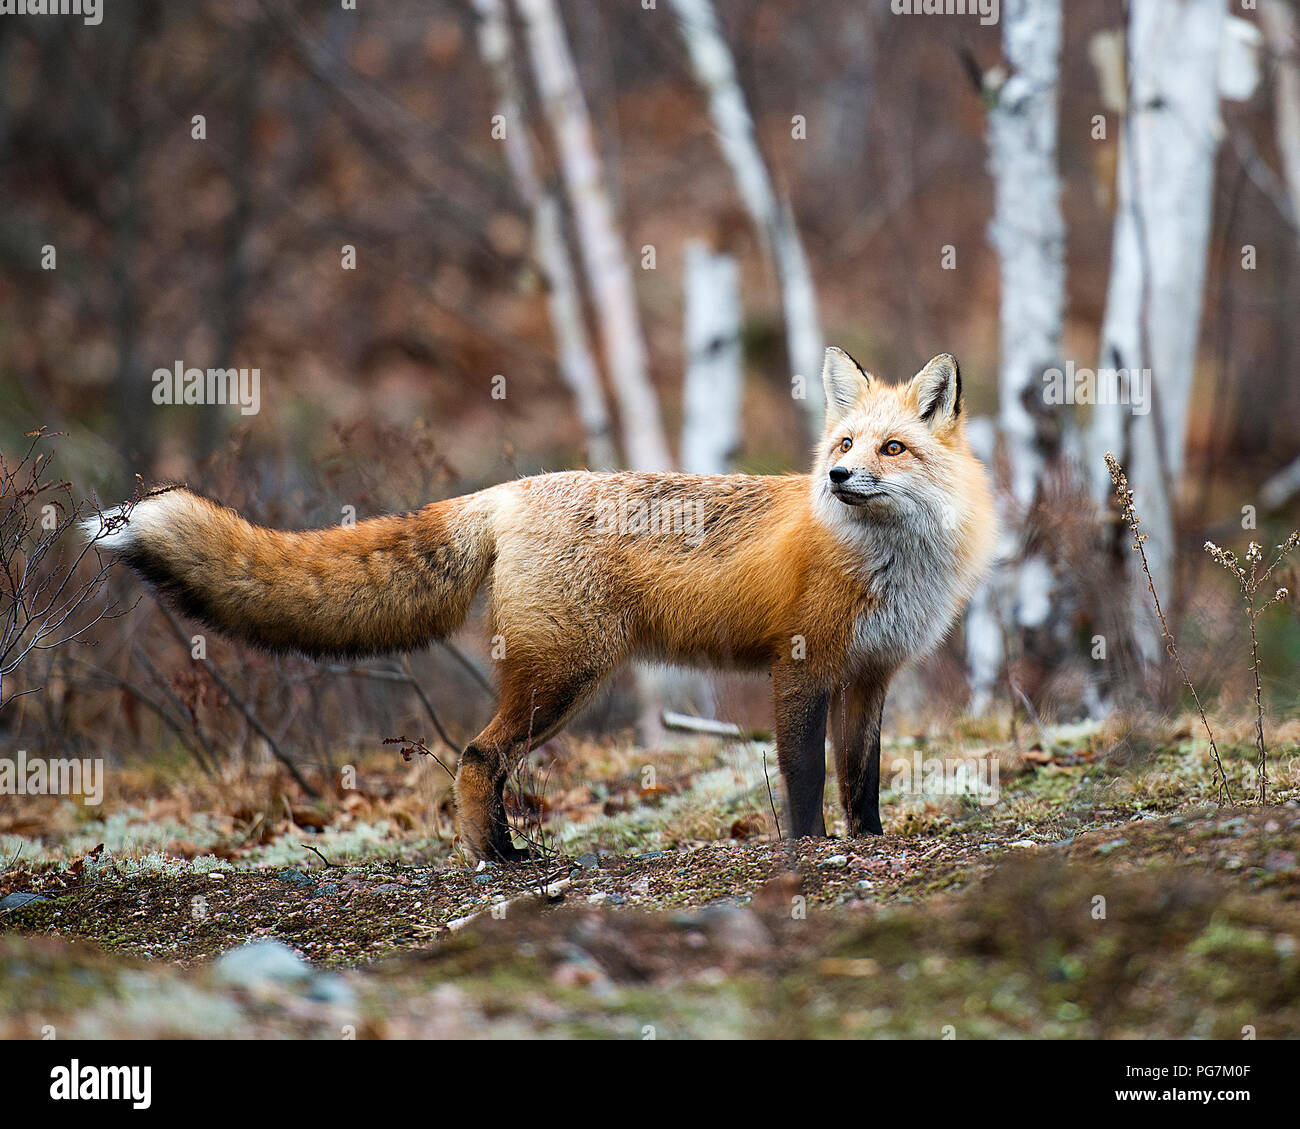 Fox Red Fox animal looking towards the sky in the forest with a background of birch trees in  its surrounding and environment. Stock Photo